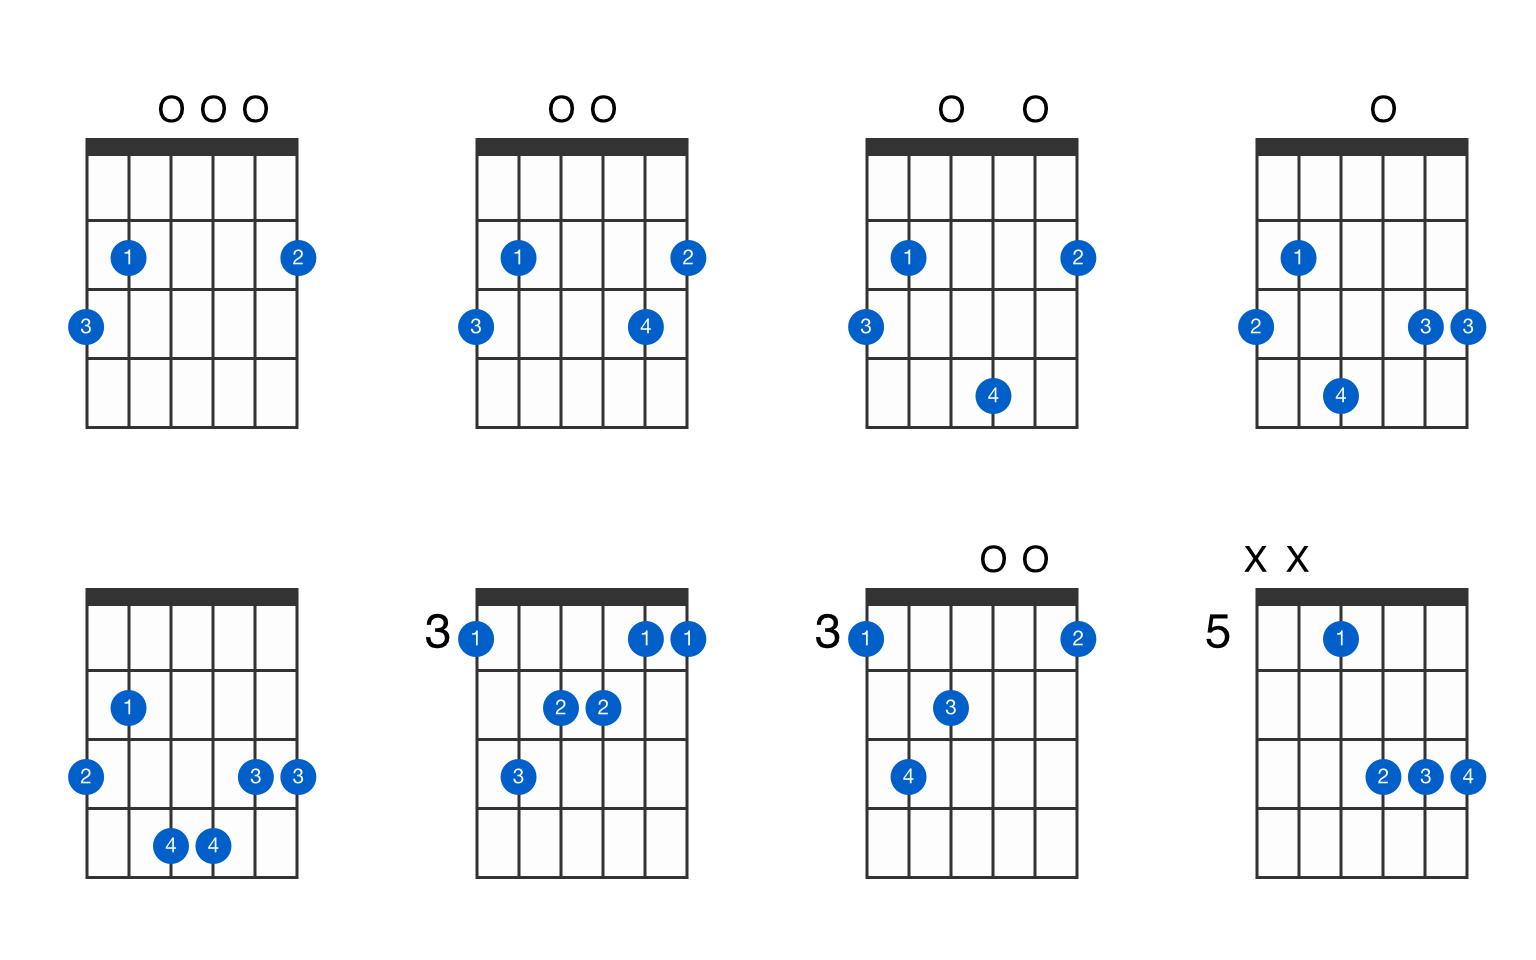 Common G Major 7th Chords #guitarlesson